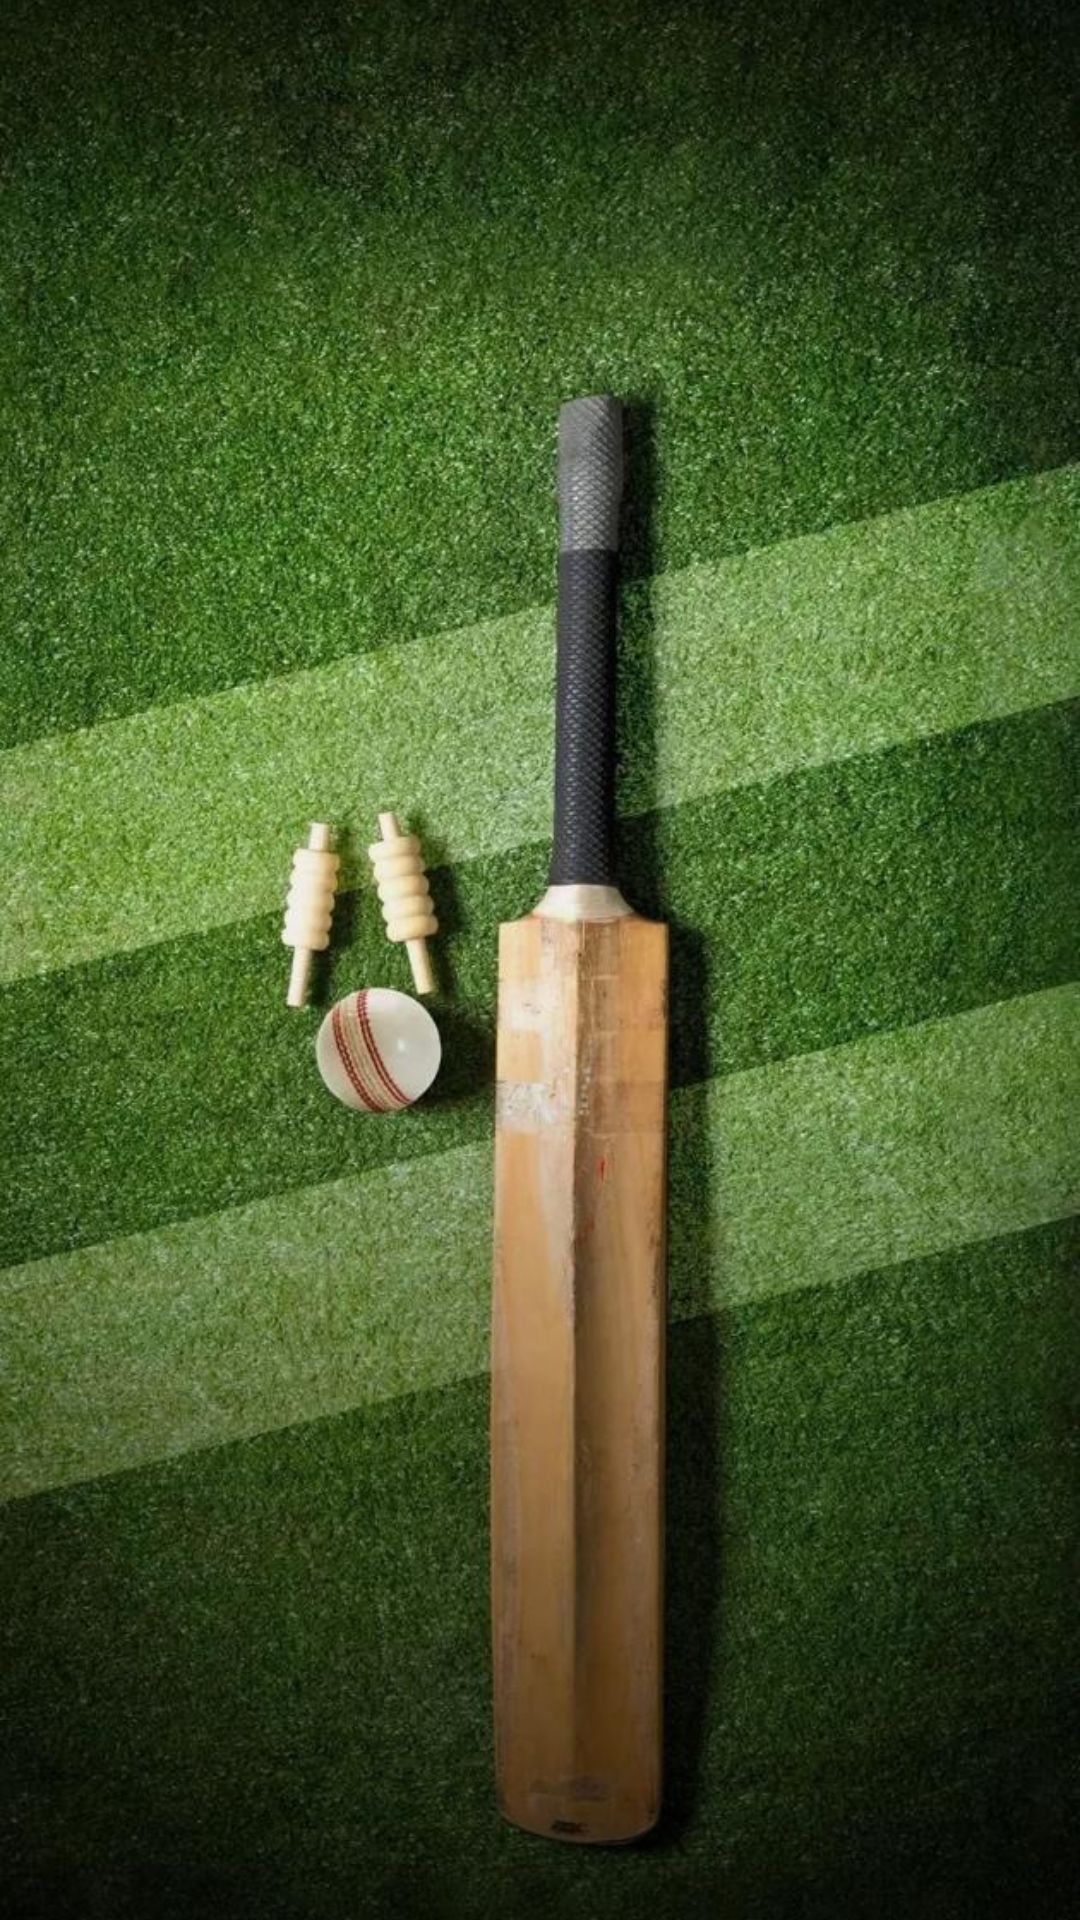 Cricket Game Image Wallpapers